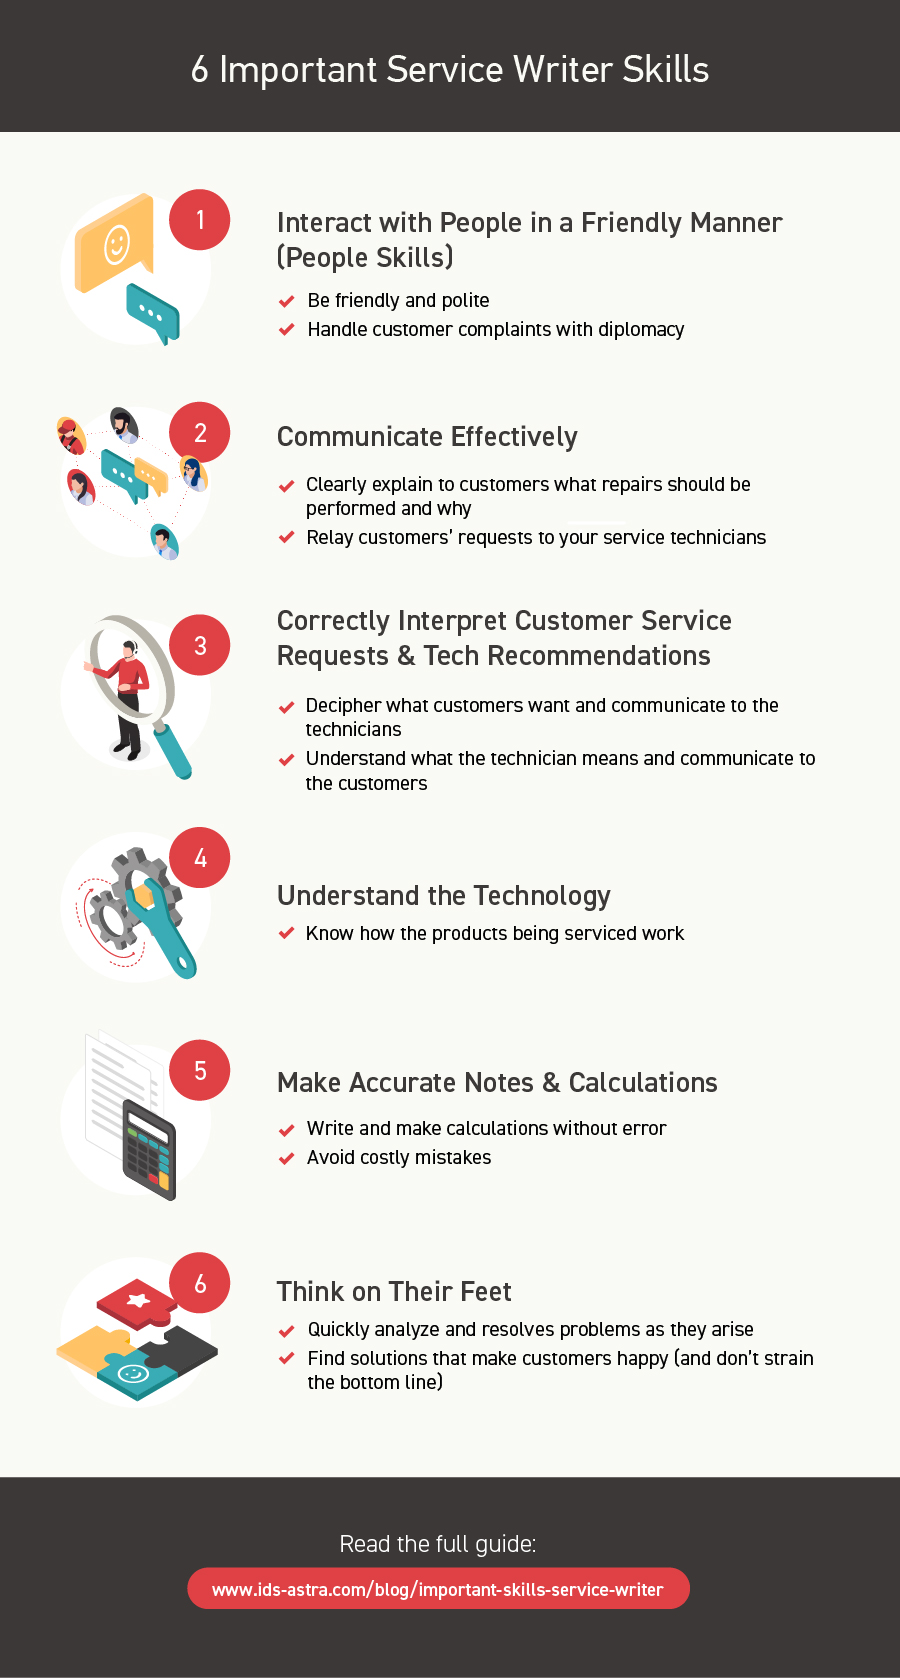 6 Important Service Writer Skills Infographic IDS